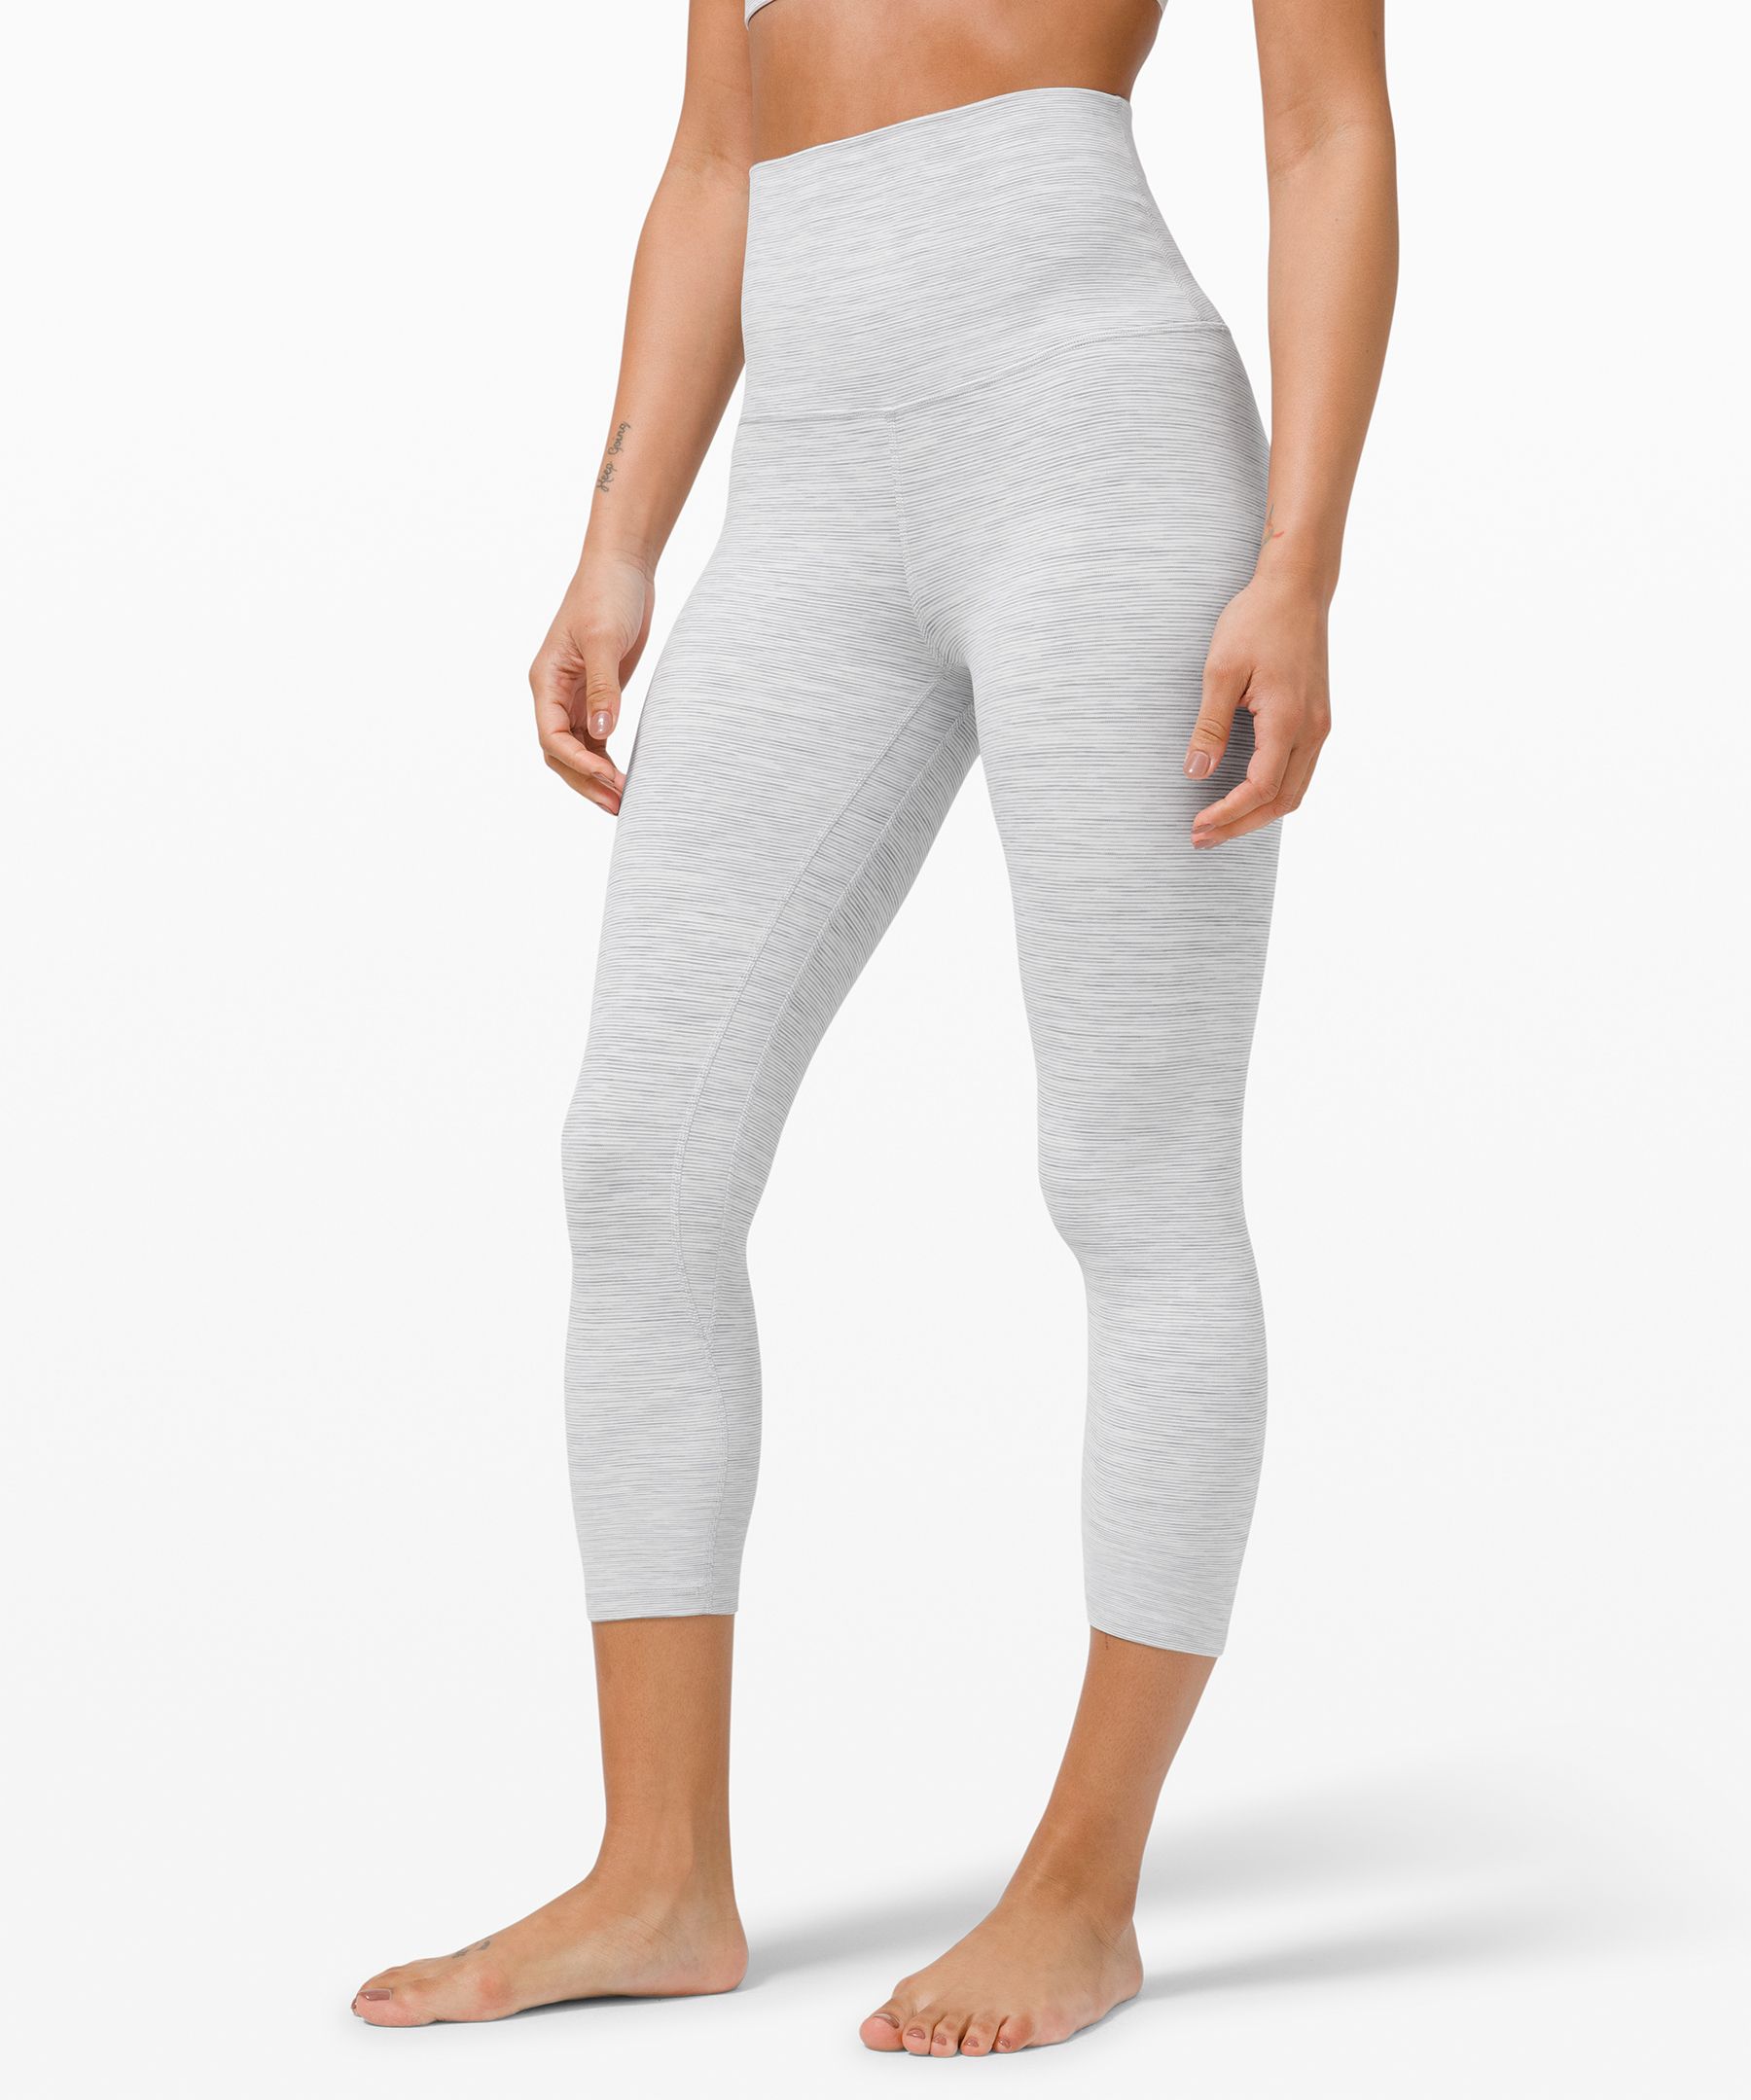 Lululemon Align™ Super High-rise Crop 21" *online Only In White